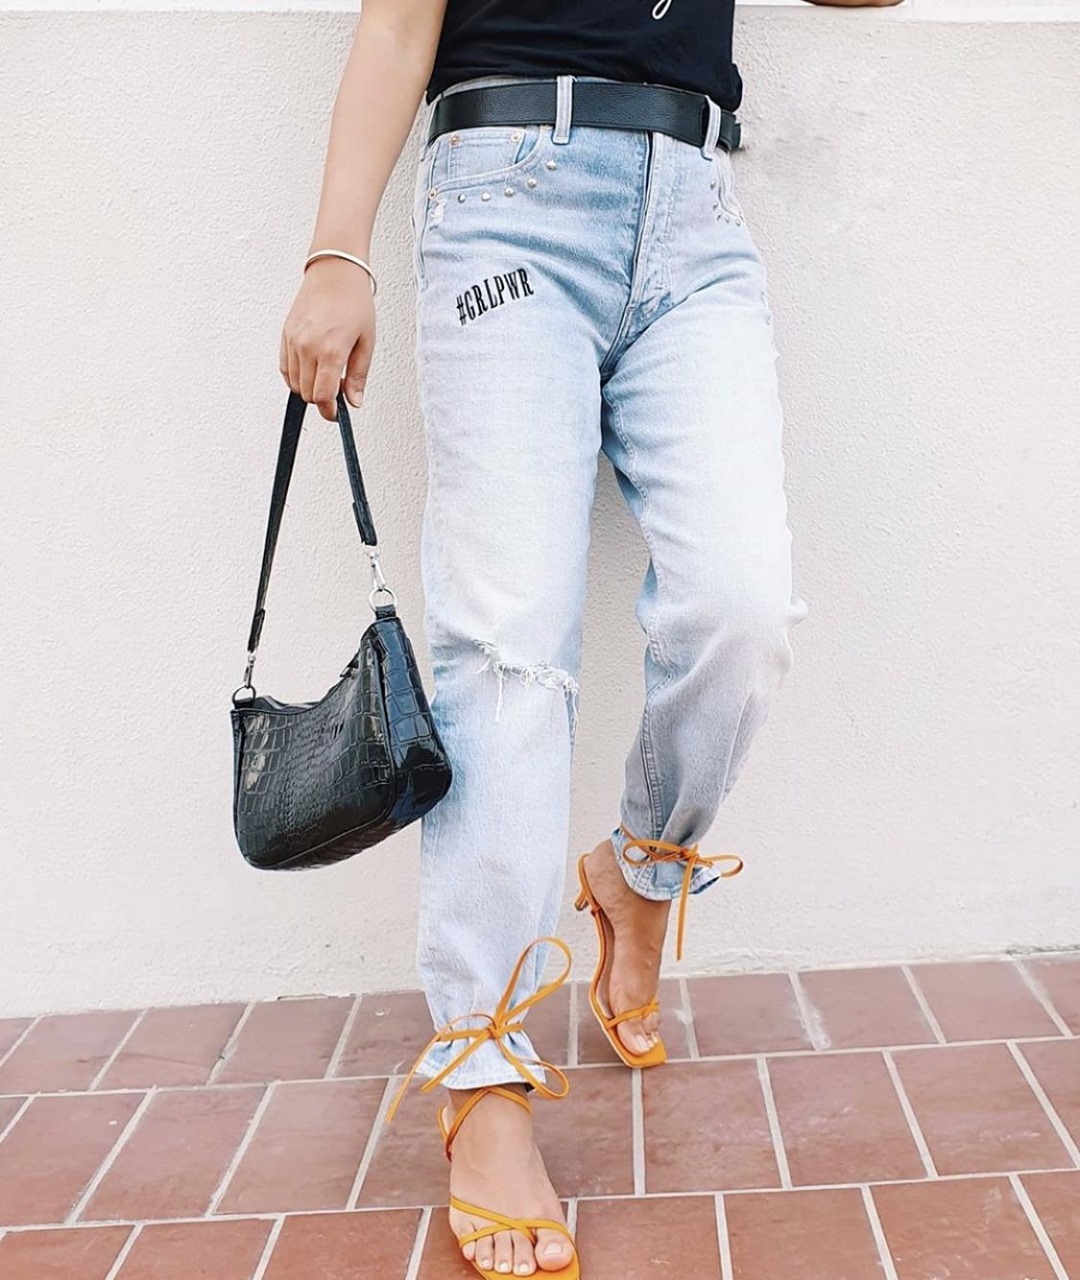 Gap Middle East - We love how @sushiandsandals customized her Gap jeans.⁣
⁣
Get yours customized exclusively in store at Gap, The Dubai Mall. Tag us in your unique styles.